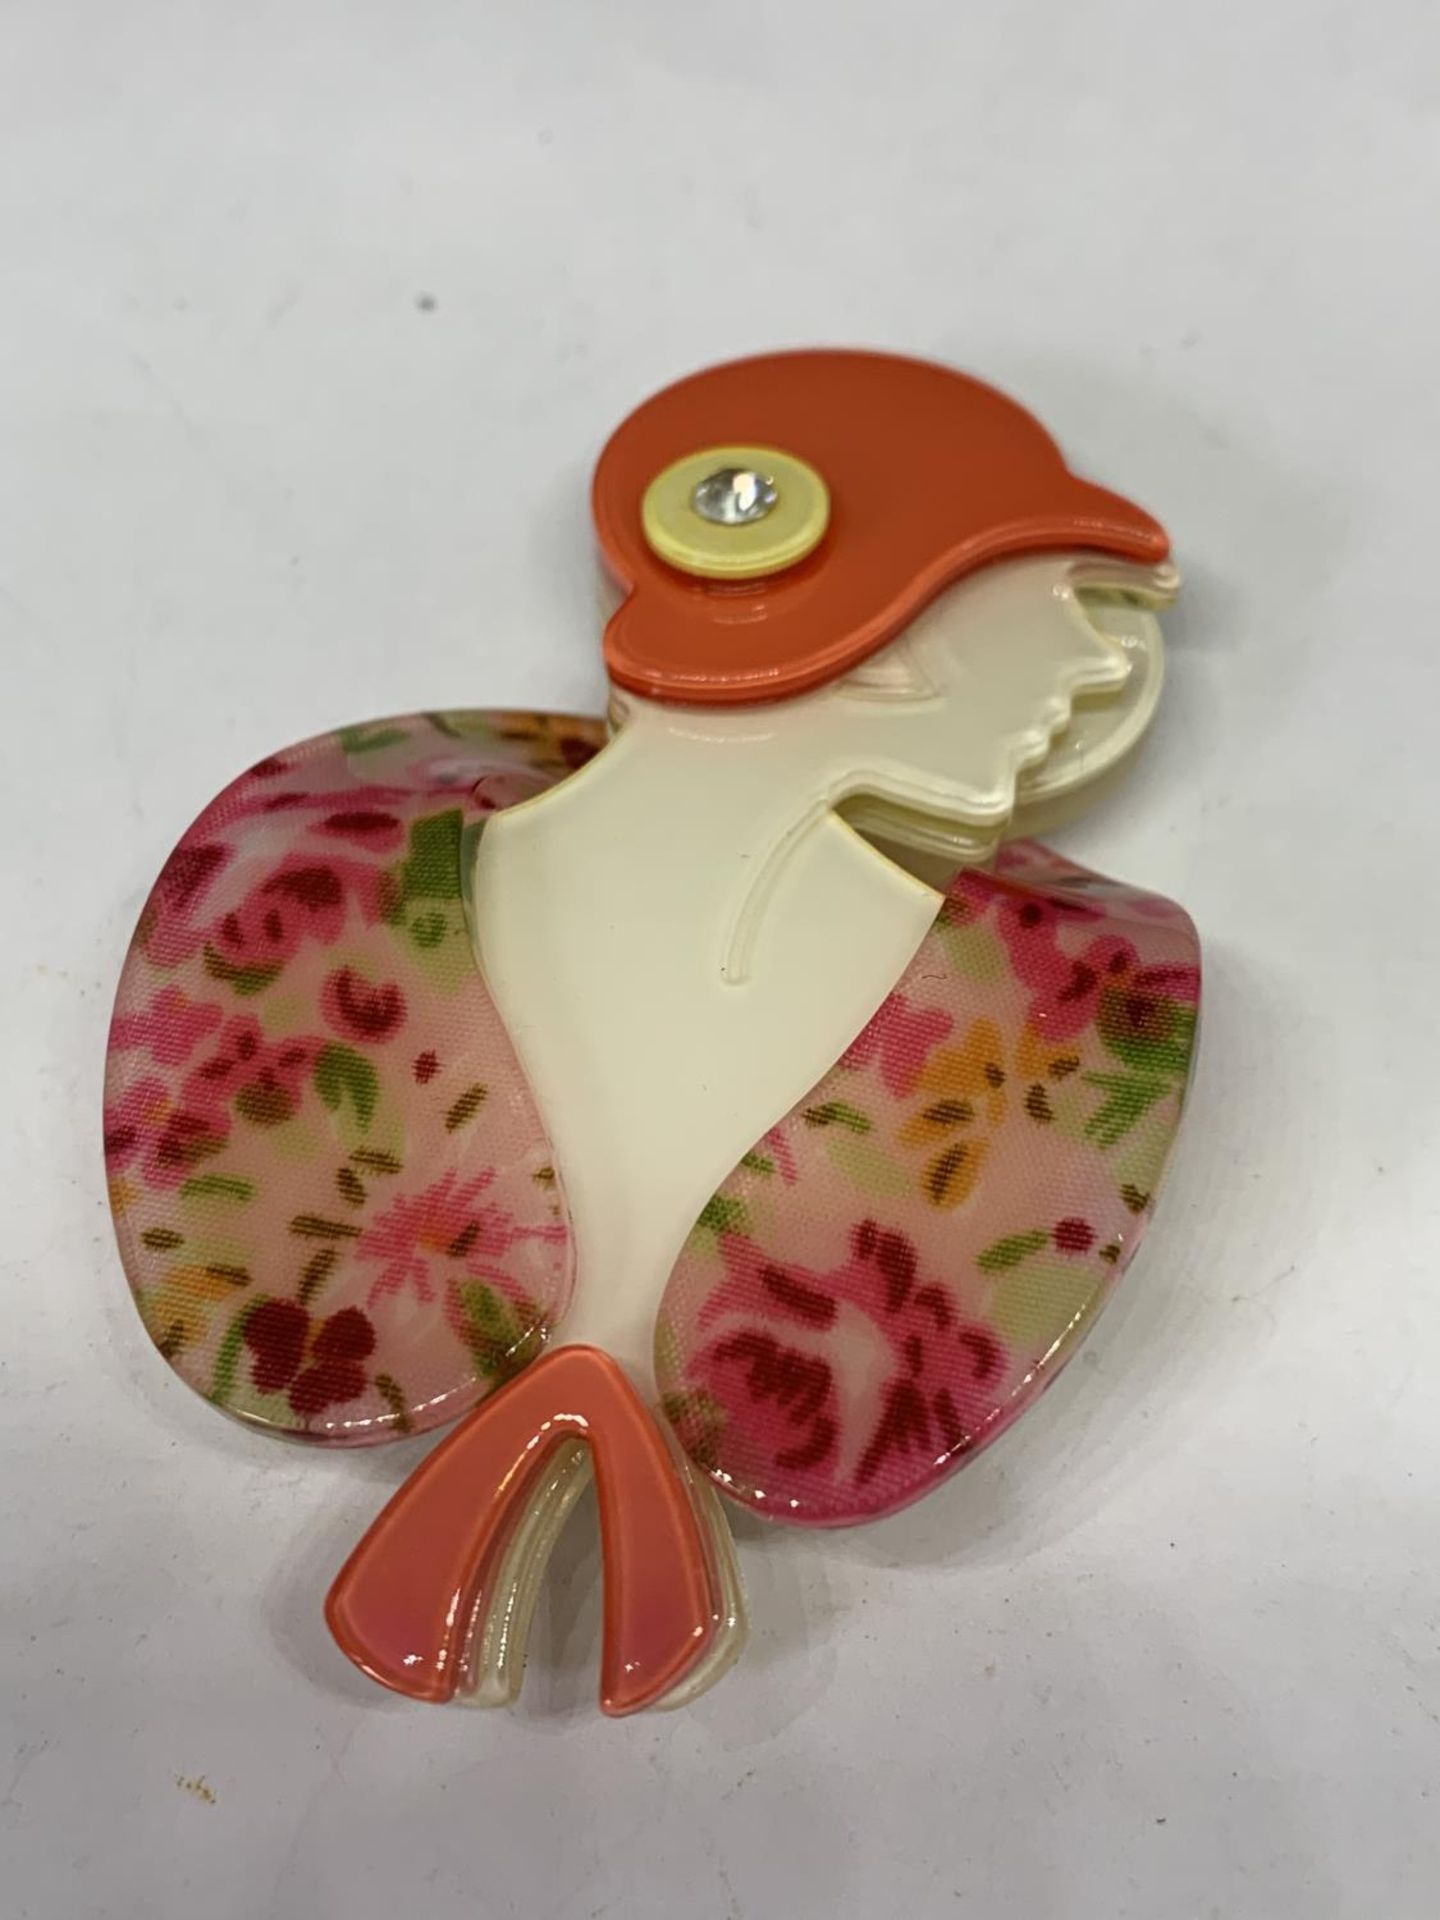 TWO ART DECO STYLE BROOCHES OF ELEGANT LADIES - Image 3 of 3